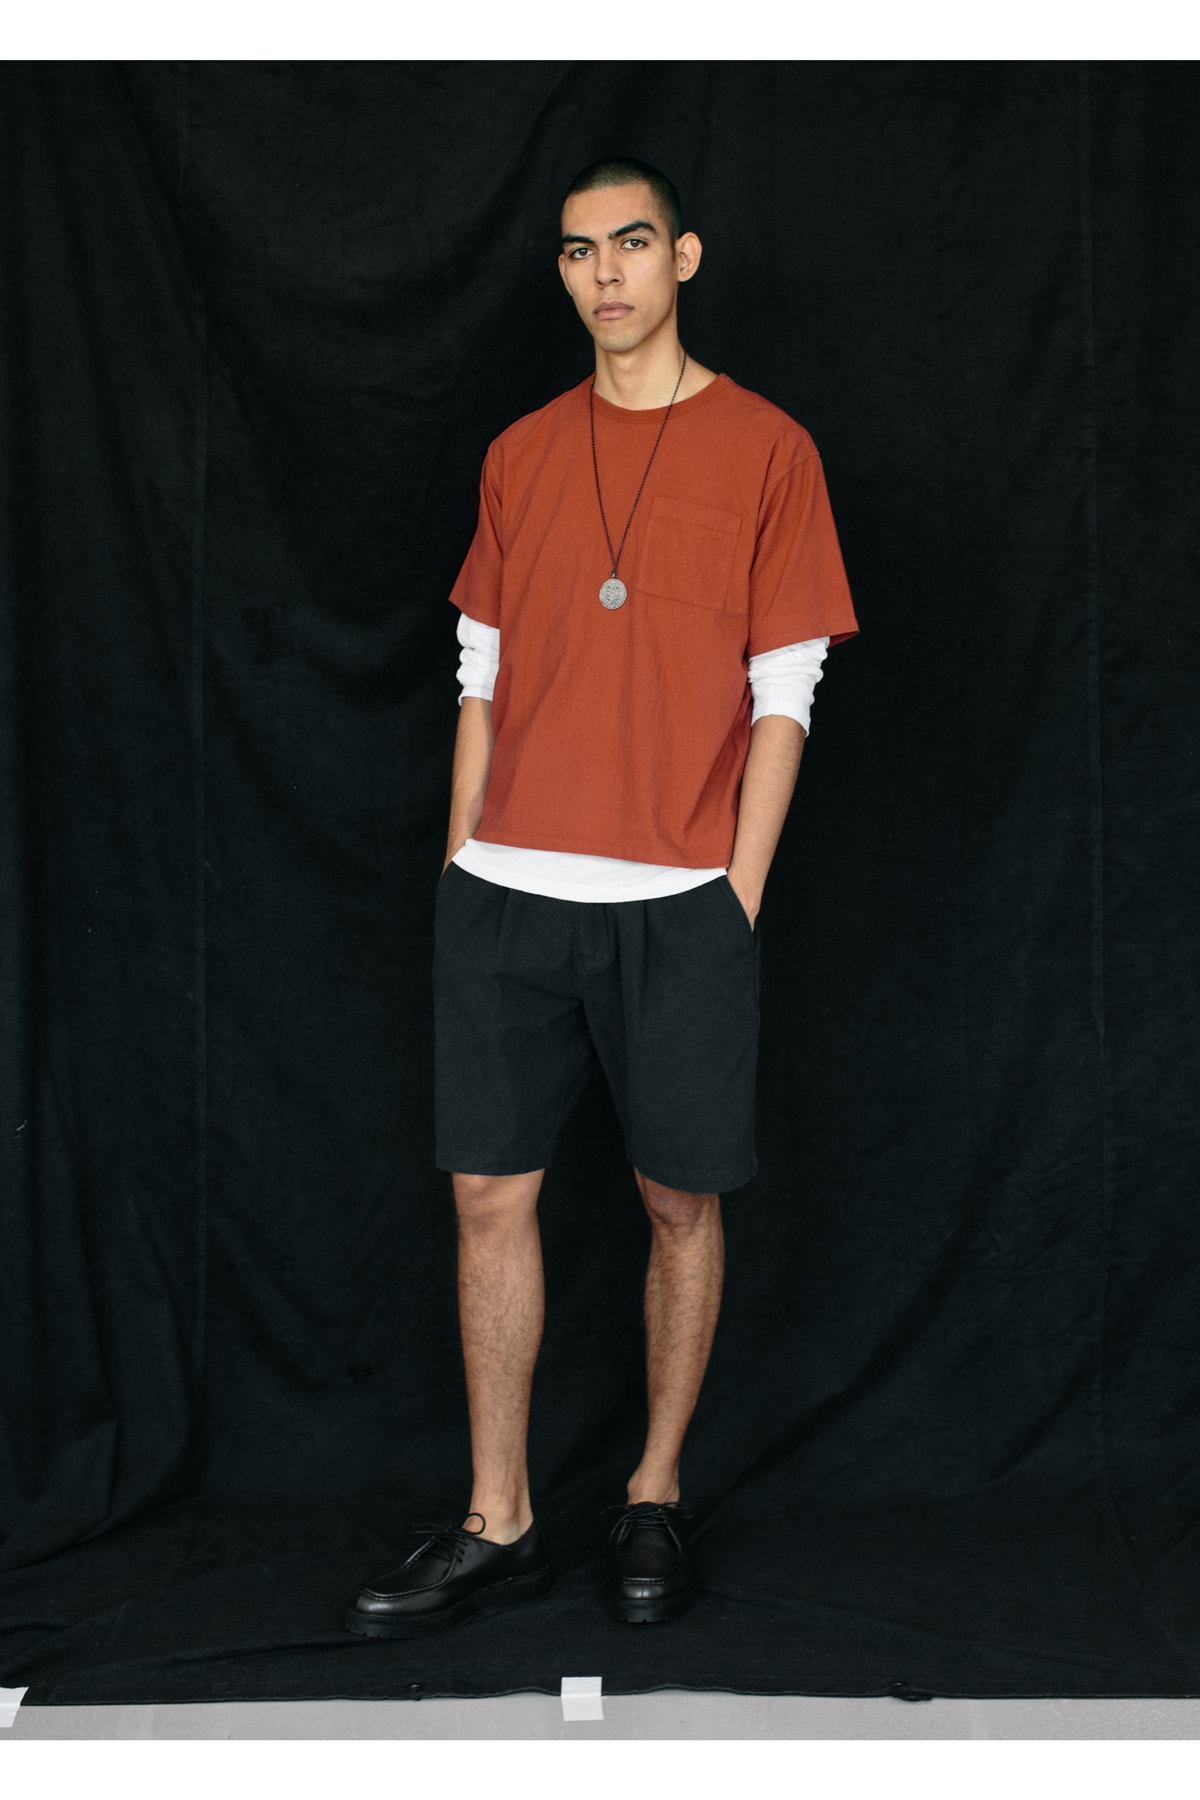 Saturdays NYC Surf Pre Fall 2018 Lookbook Collection Surfing